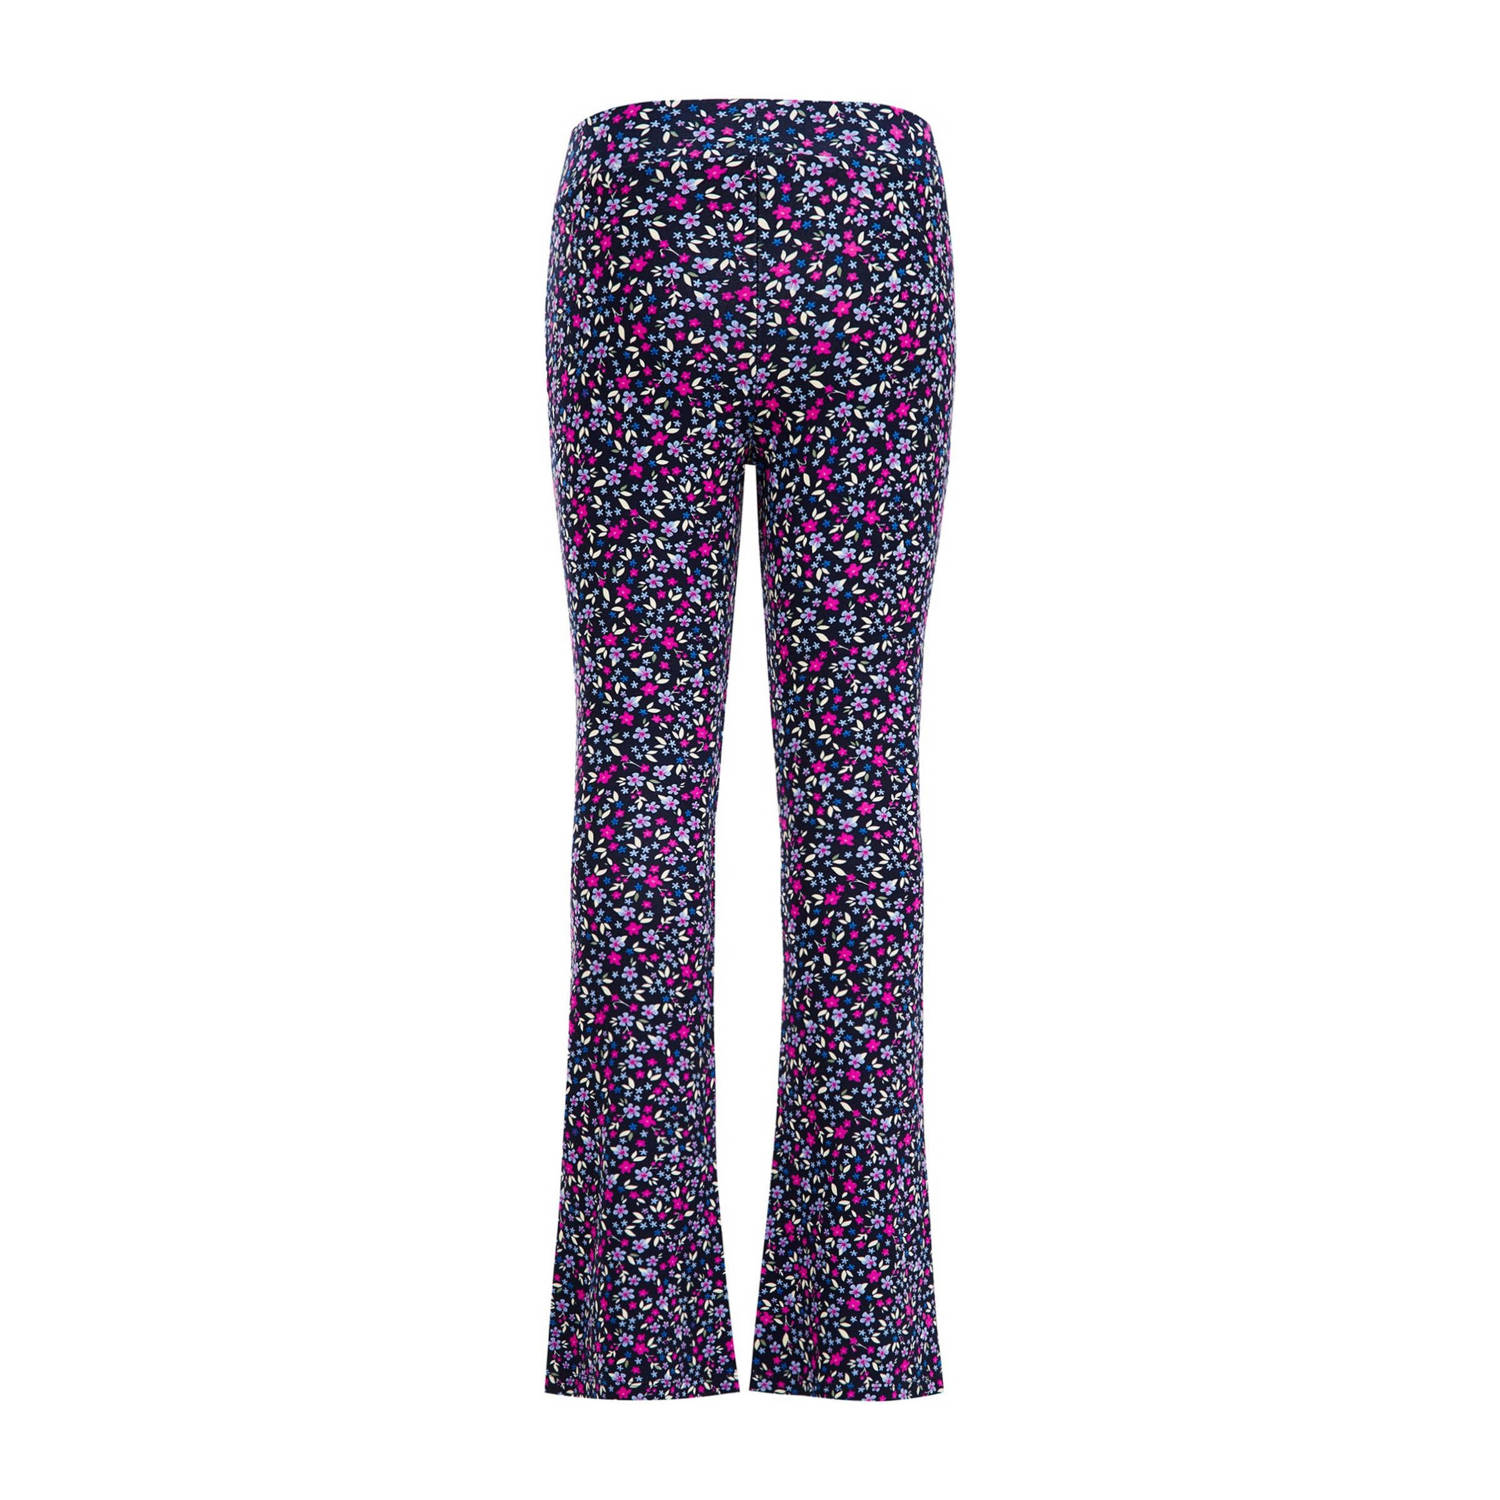 WE Fashion flared broek met all over print donkerblauw roze paars